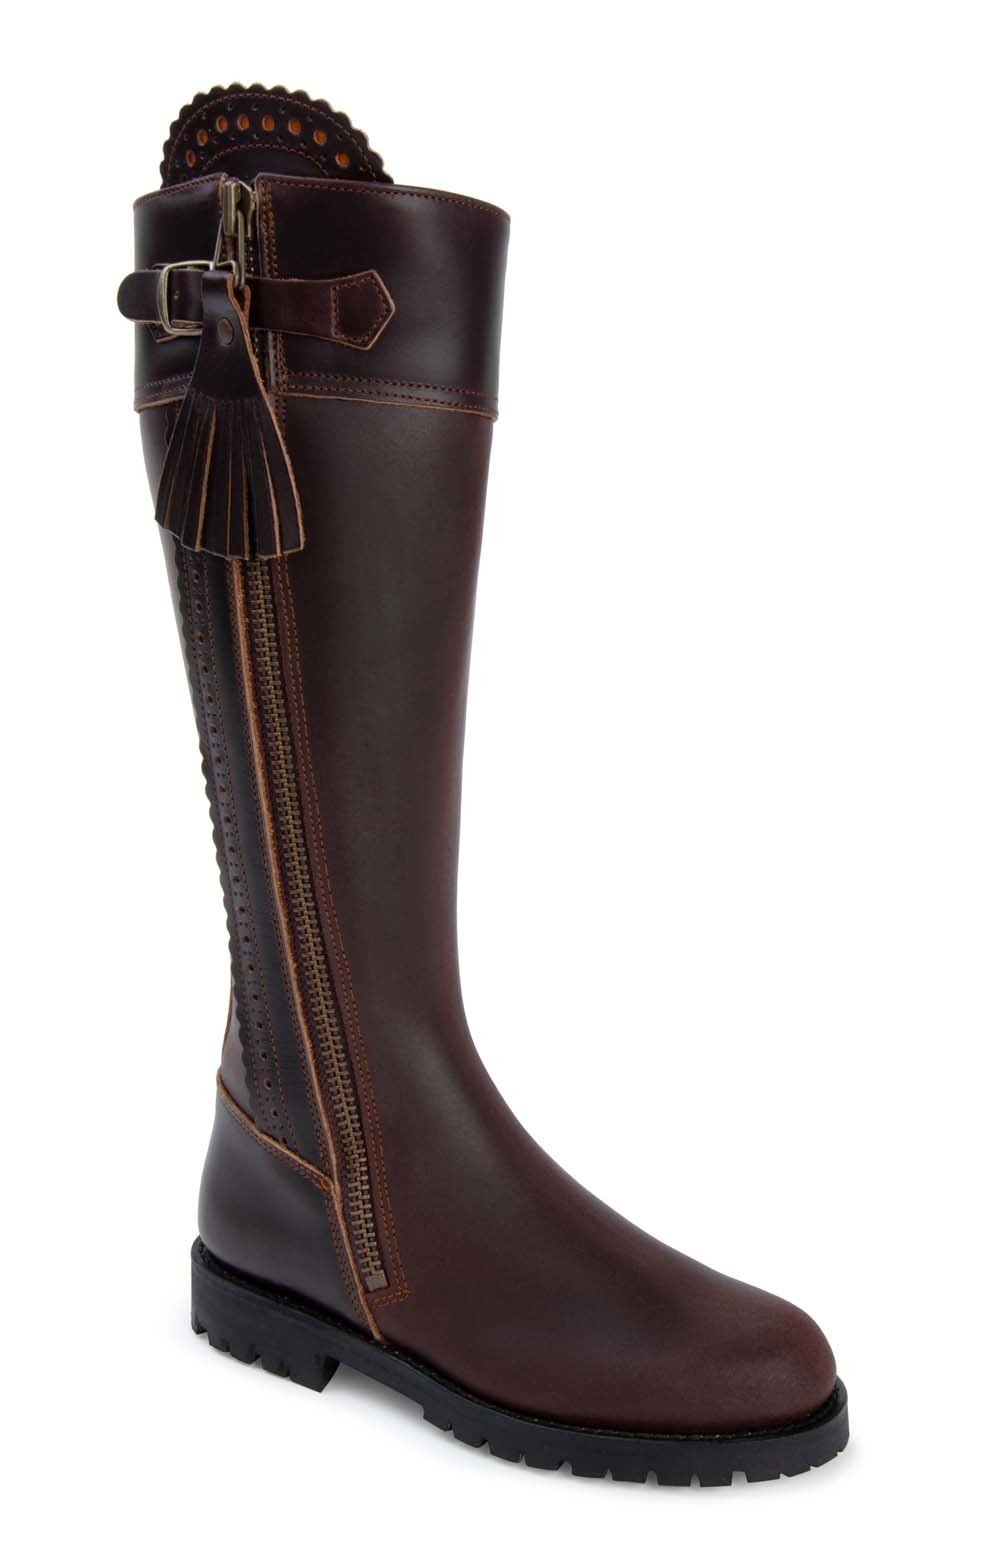 Ladies Traditional Riding Boot - House 